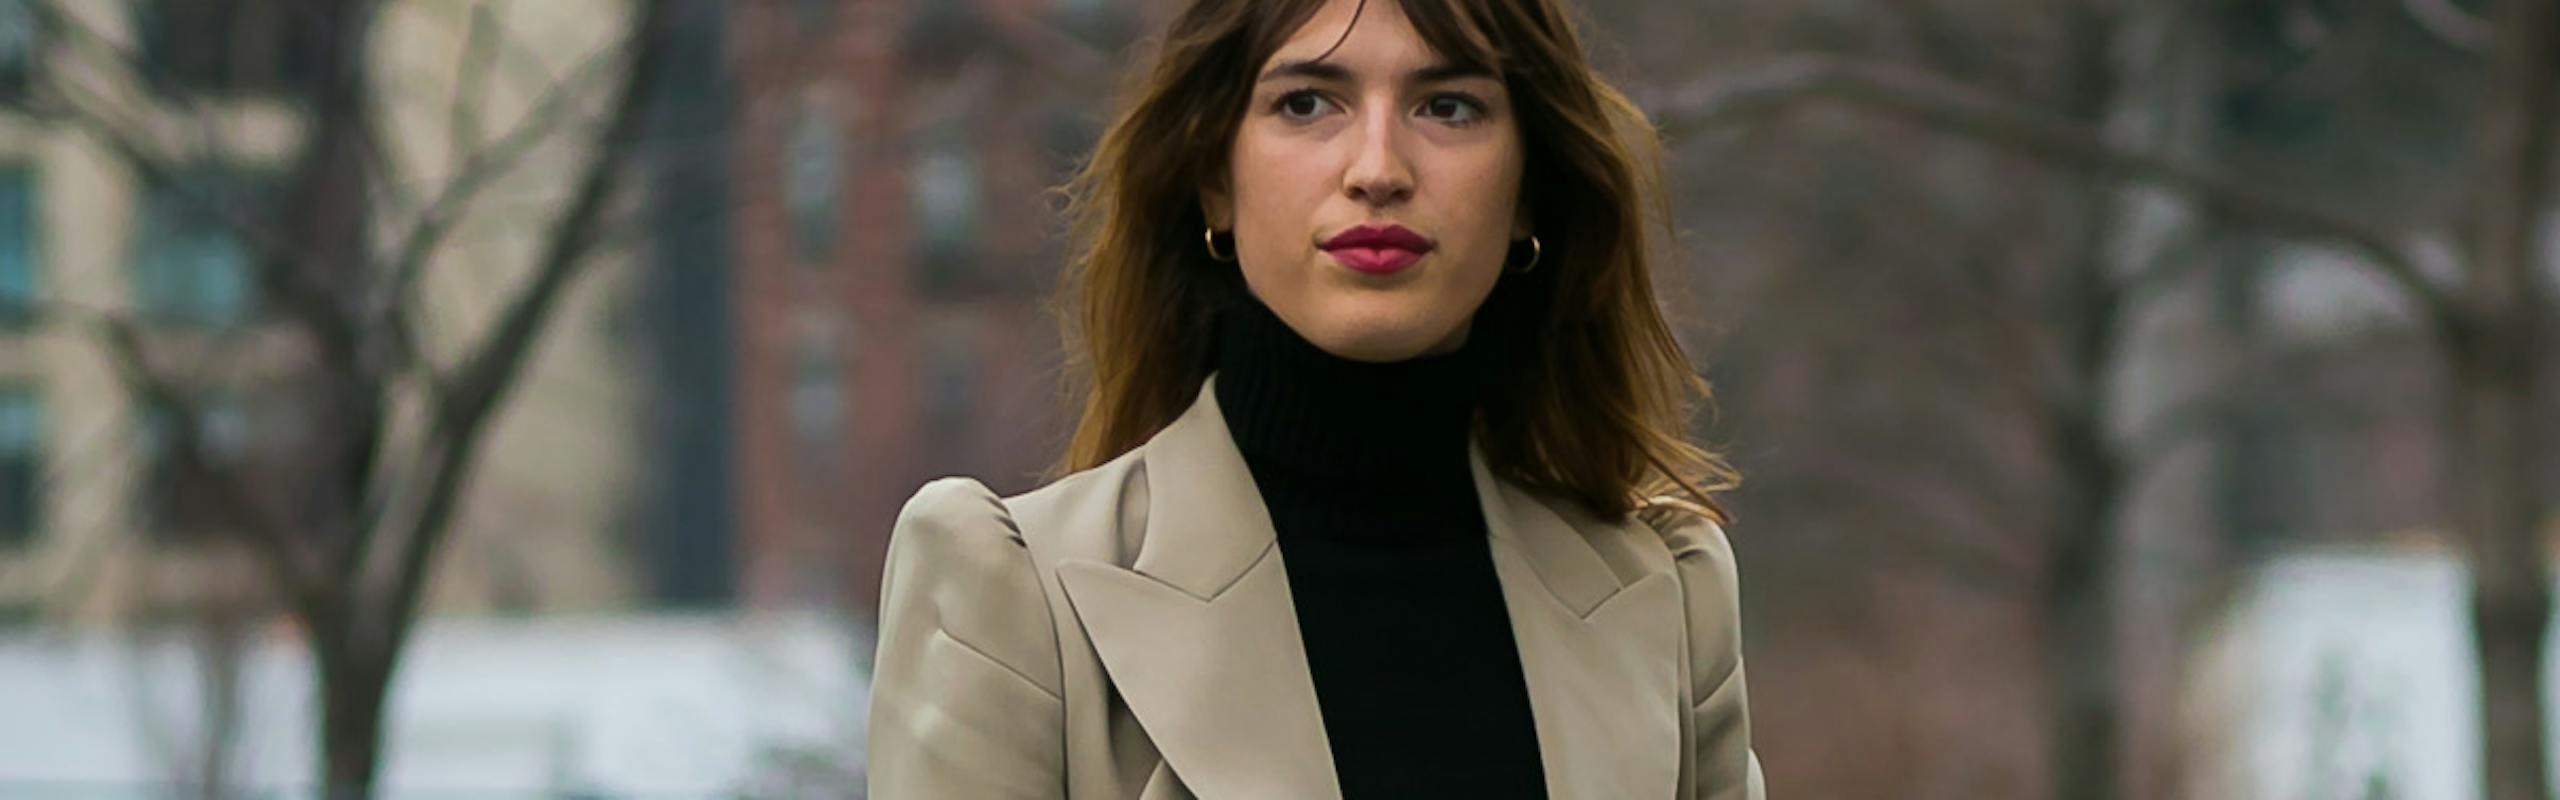 Jeanne Damas in a light brown blazer, black top, and blue jeans French girl style icons.